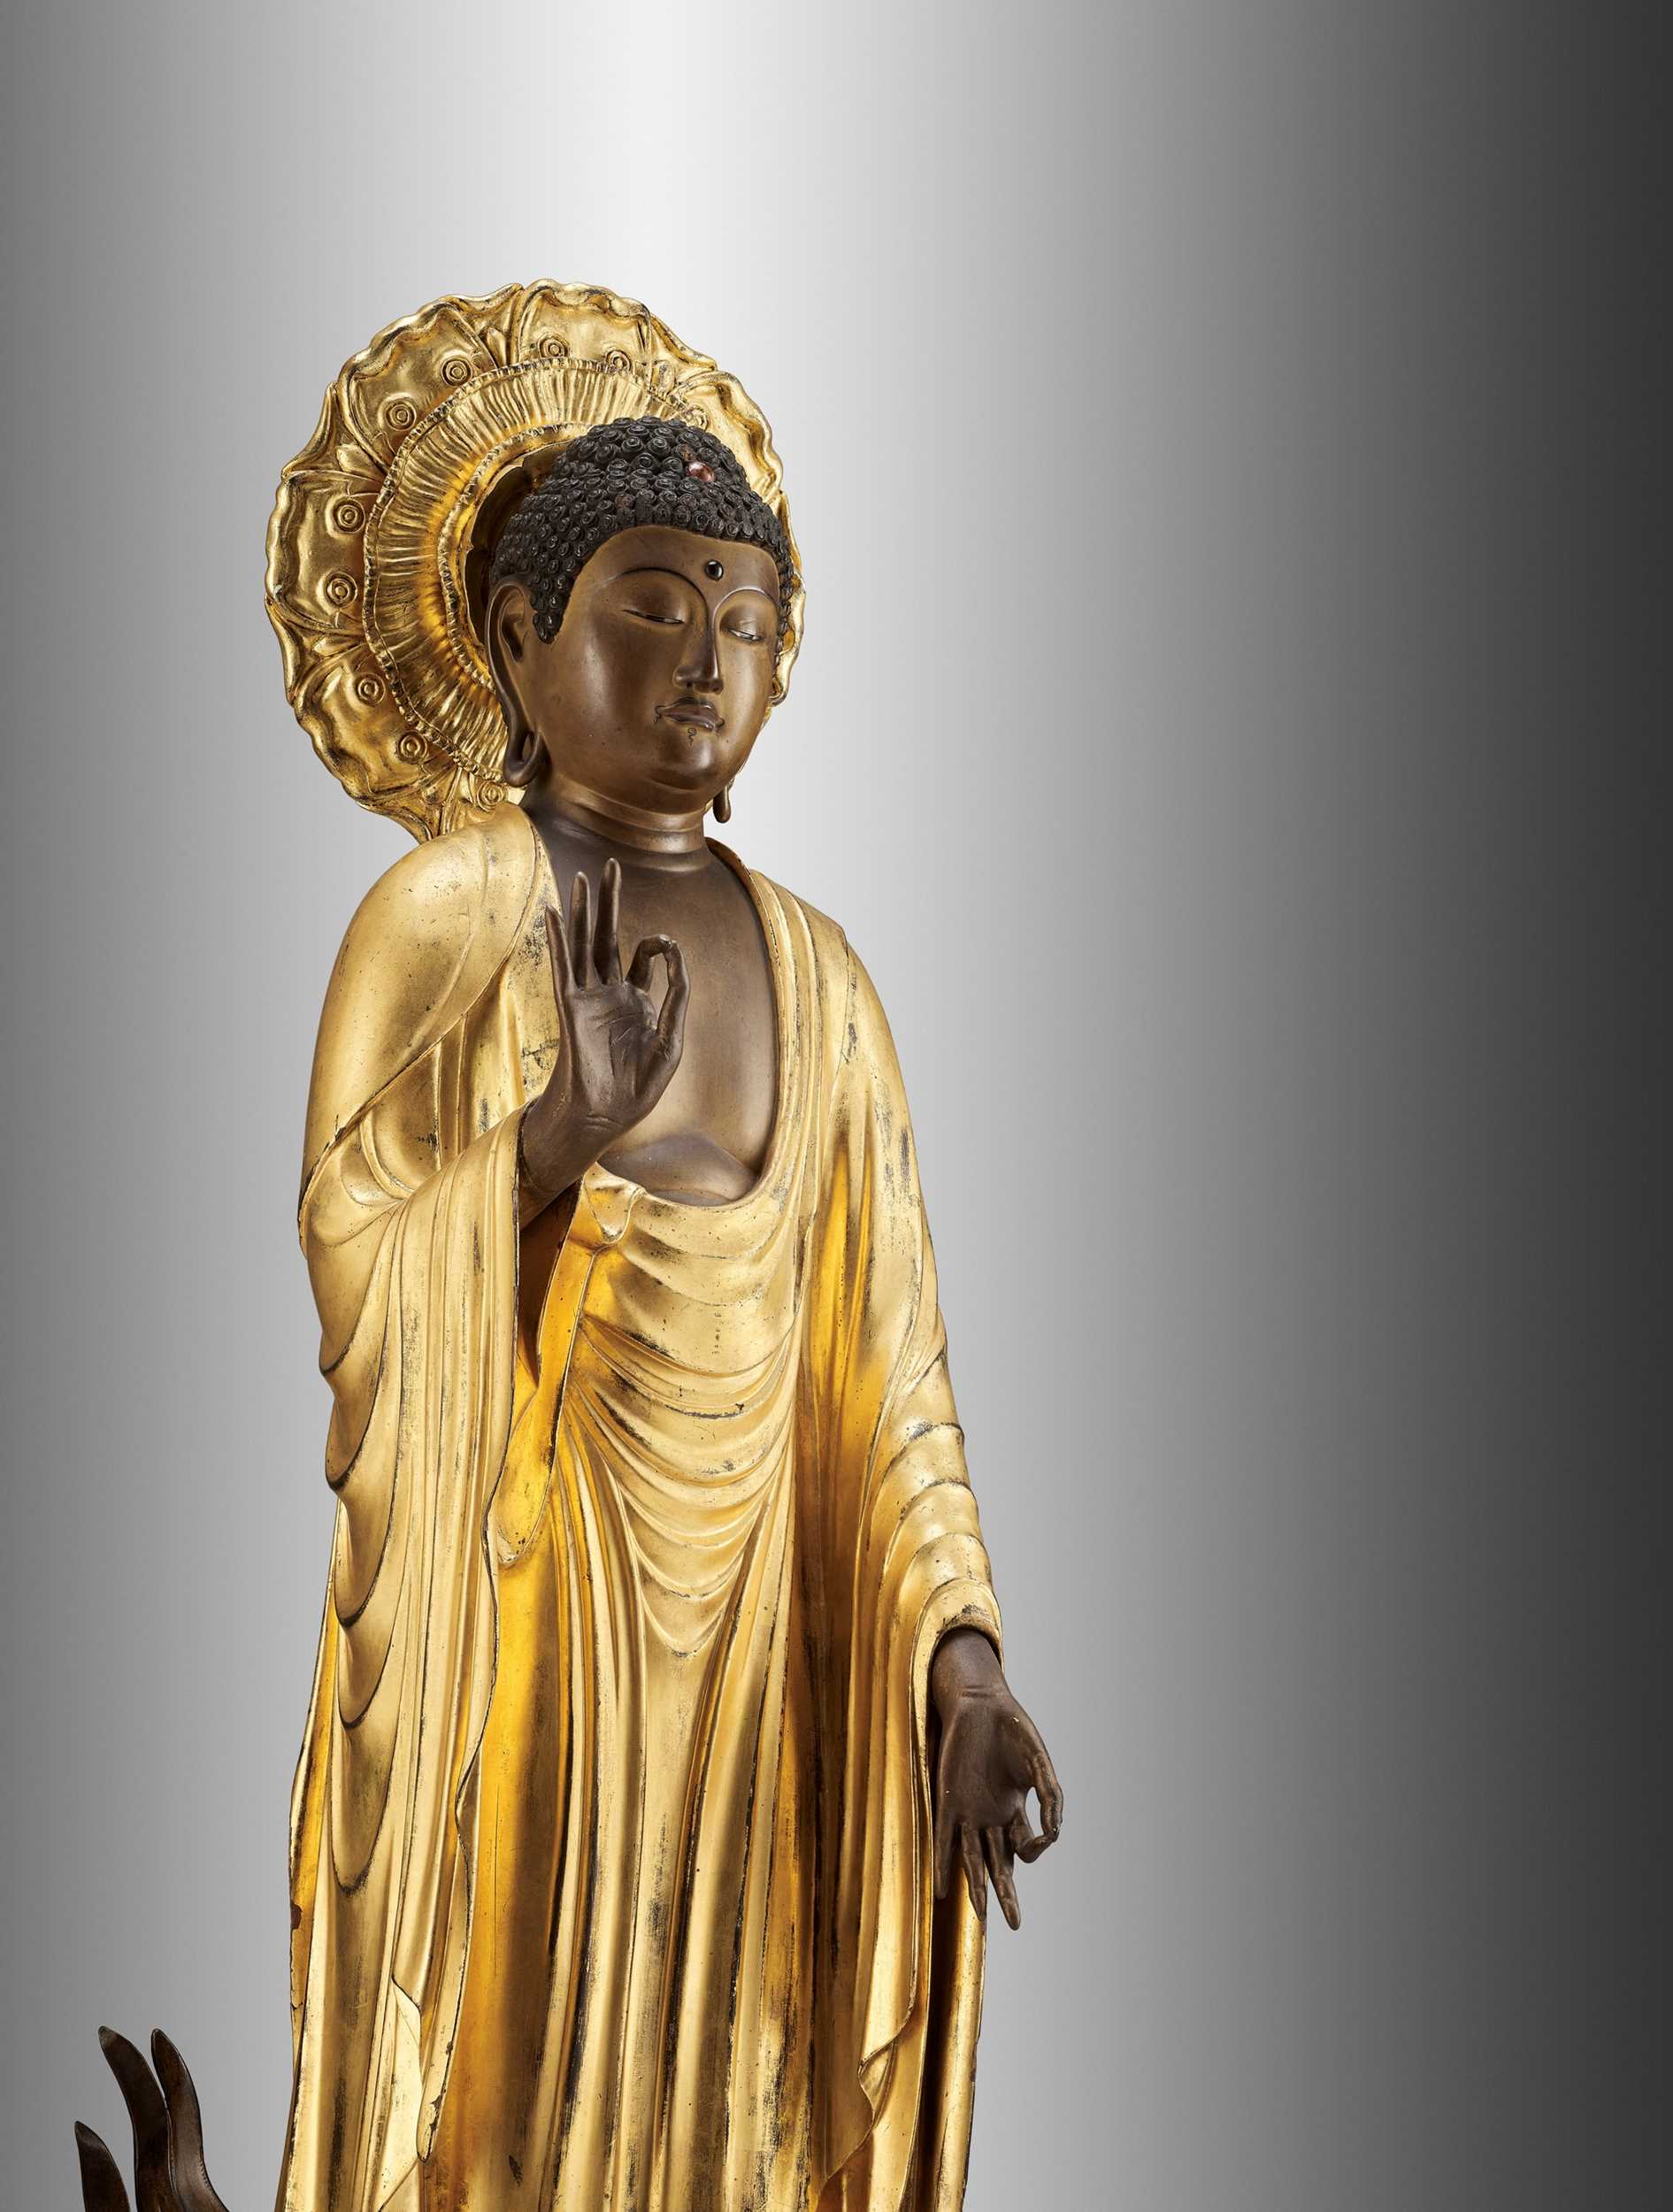 Lot 127 - A MAGNIFICENT AND VERY LARGE FIGURE OF AMIDA, BUDDHA OF INFINITE LIGHT